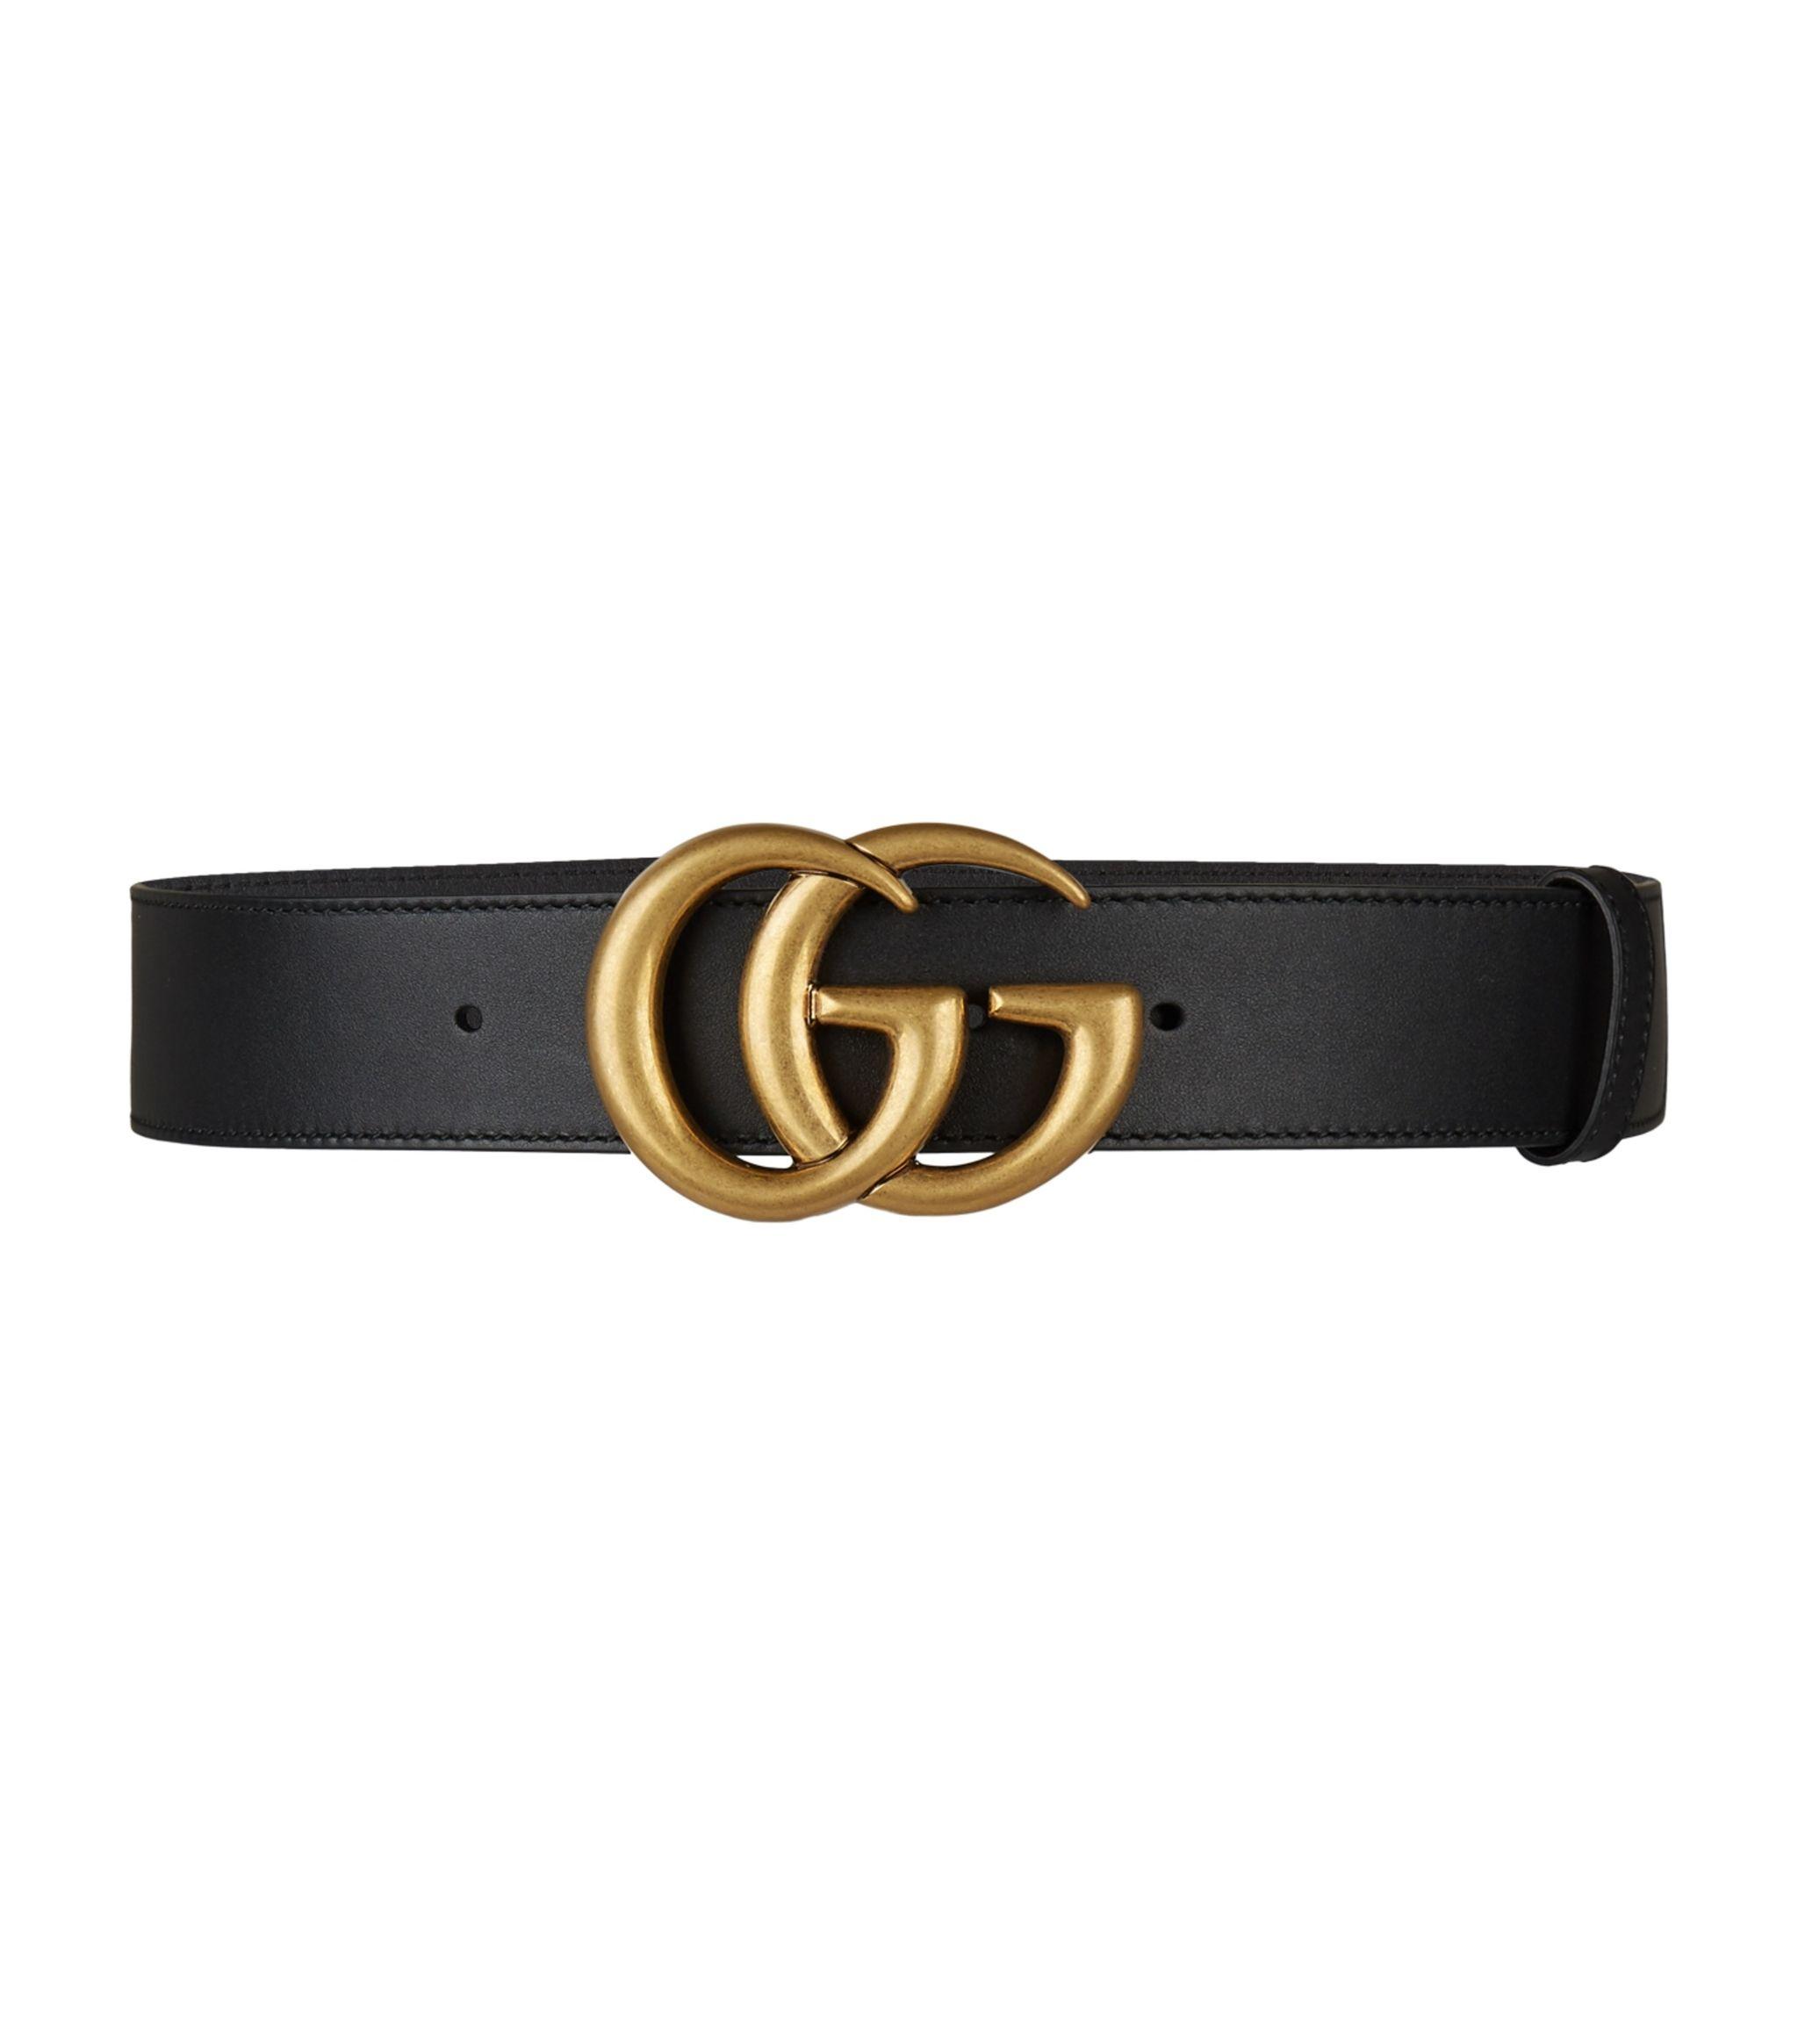  Gucci  Leather Marmont  Belt  in Black Save 15 Lyst